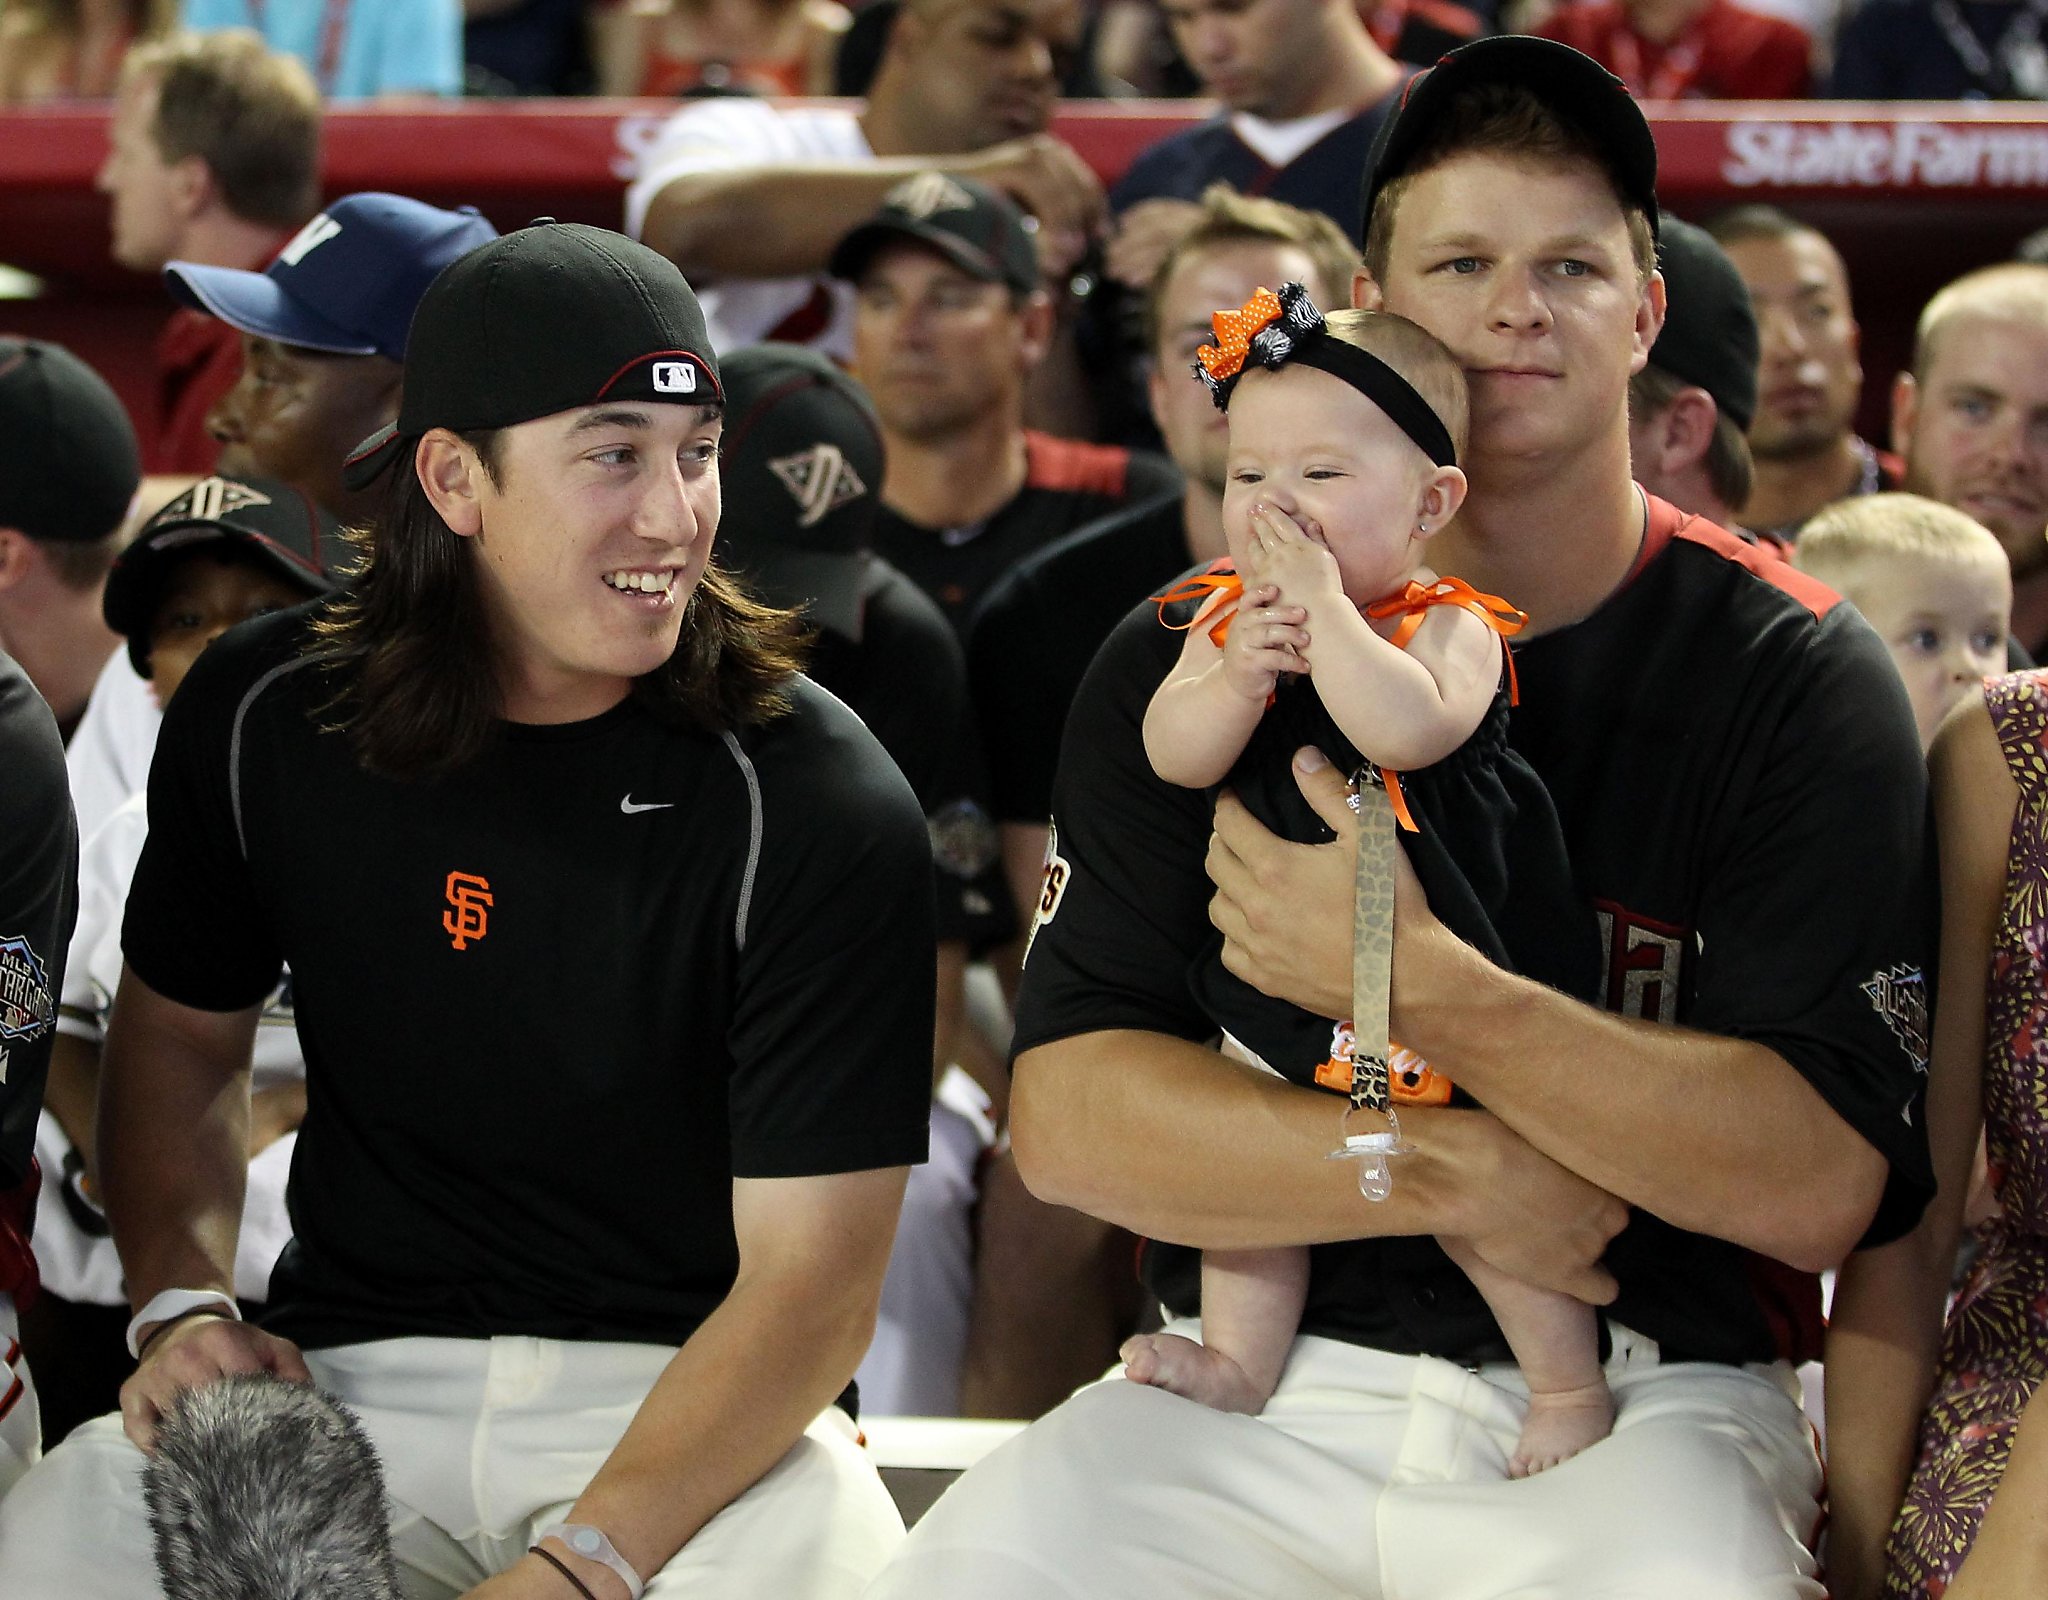 Tim Lincecum ready to go, Bochy could use him - McCovey Chronicles